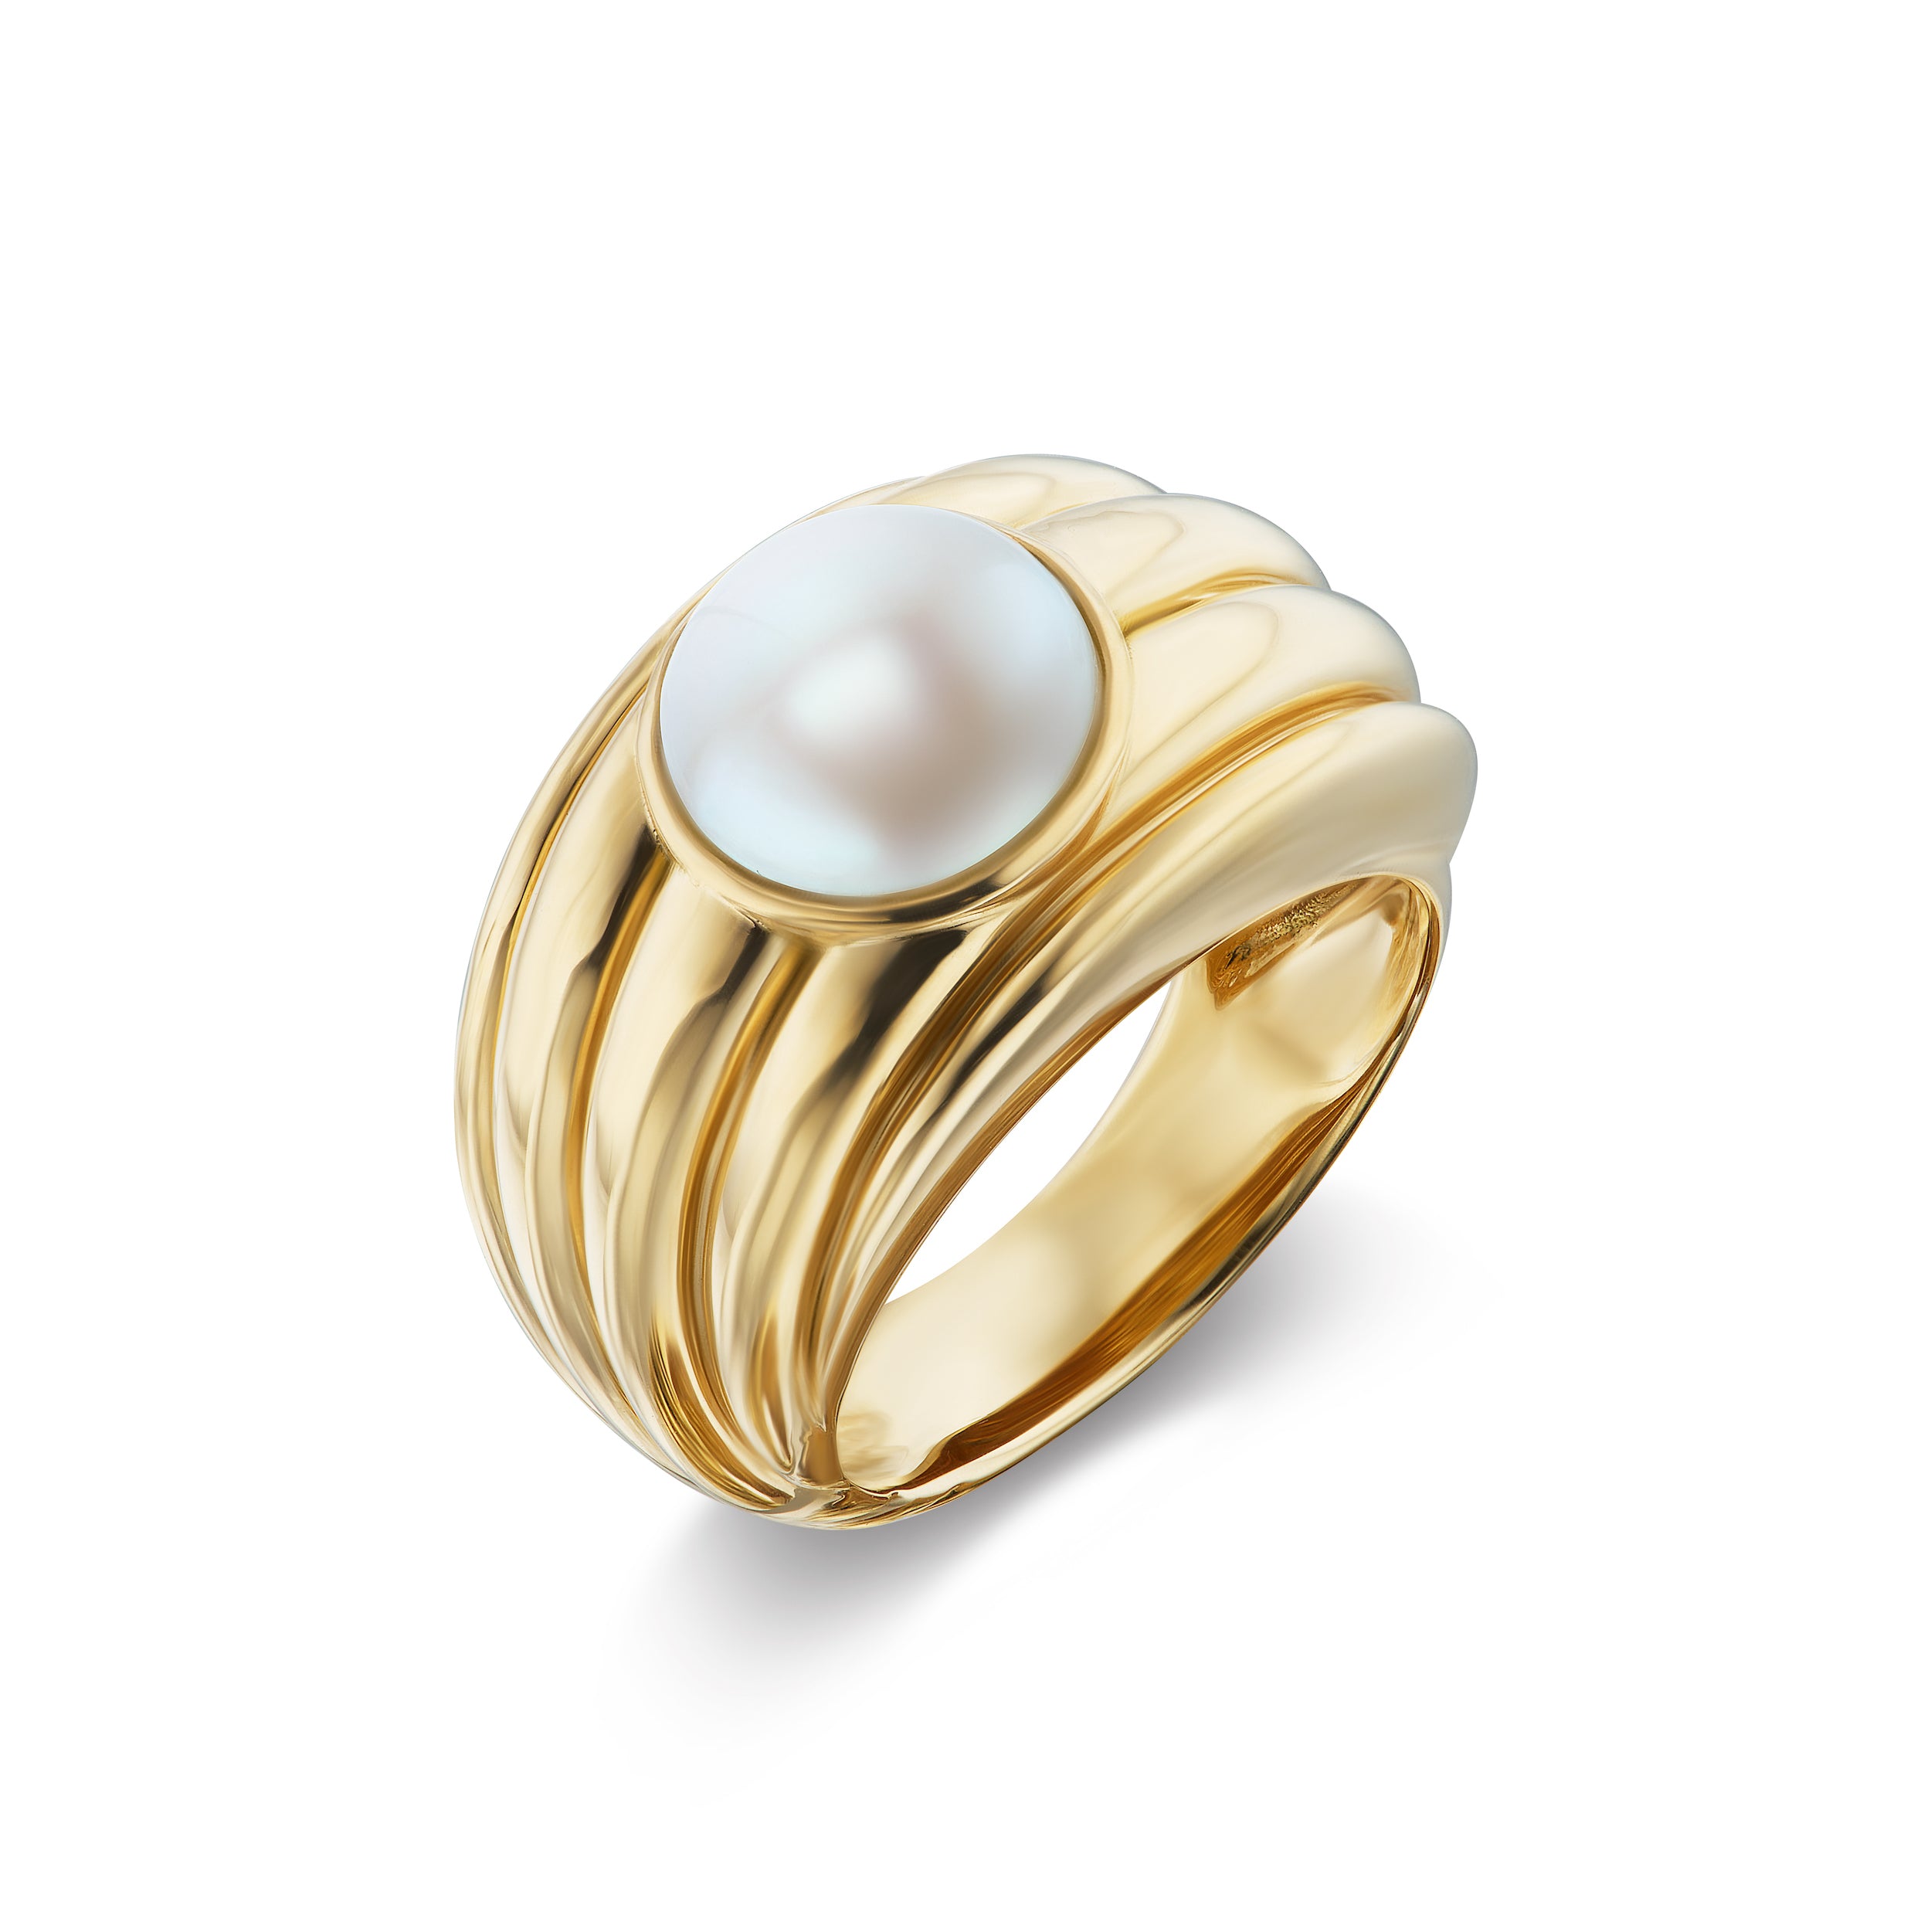 Buy PTM 925 Sterling Silver Pearl (Moti) 3.25 Ratti or 3 Cts White BIS  Hallmark 925 Sterling SilverAstrological Gemstone Ring for Men & Women for  Men and Women at Amazon.in